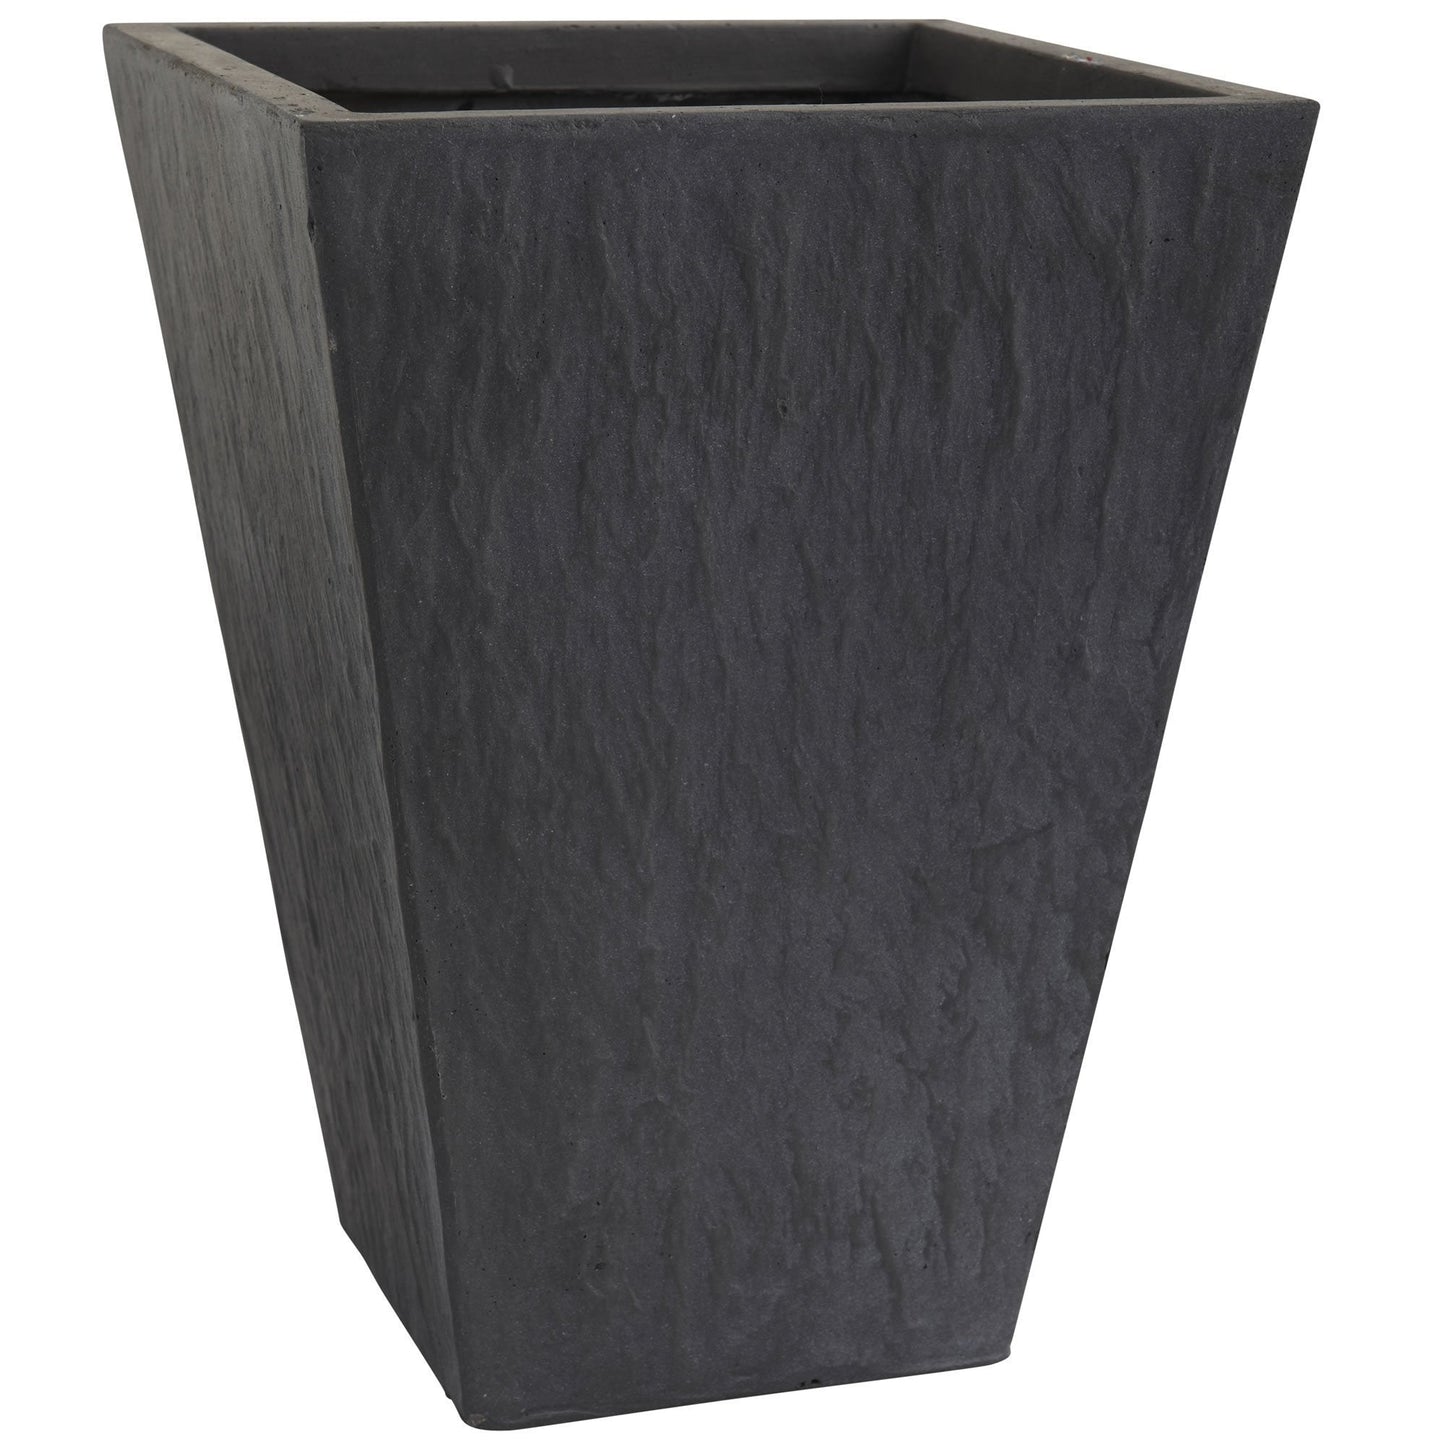 16” Slate Planter (Indoor/Outdoor) by Nearly Natural